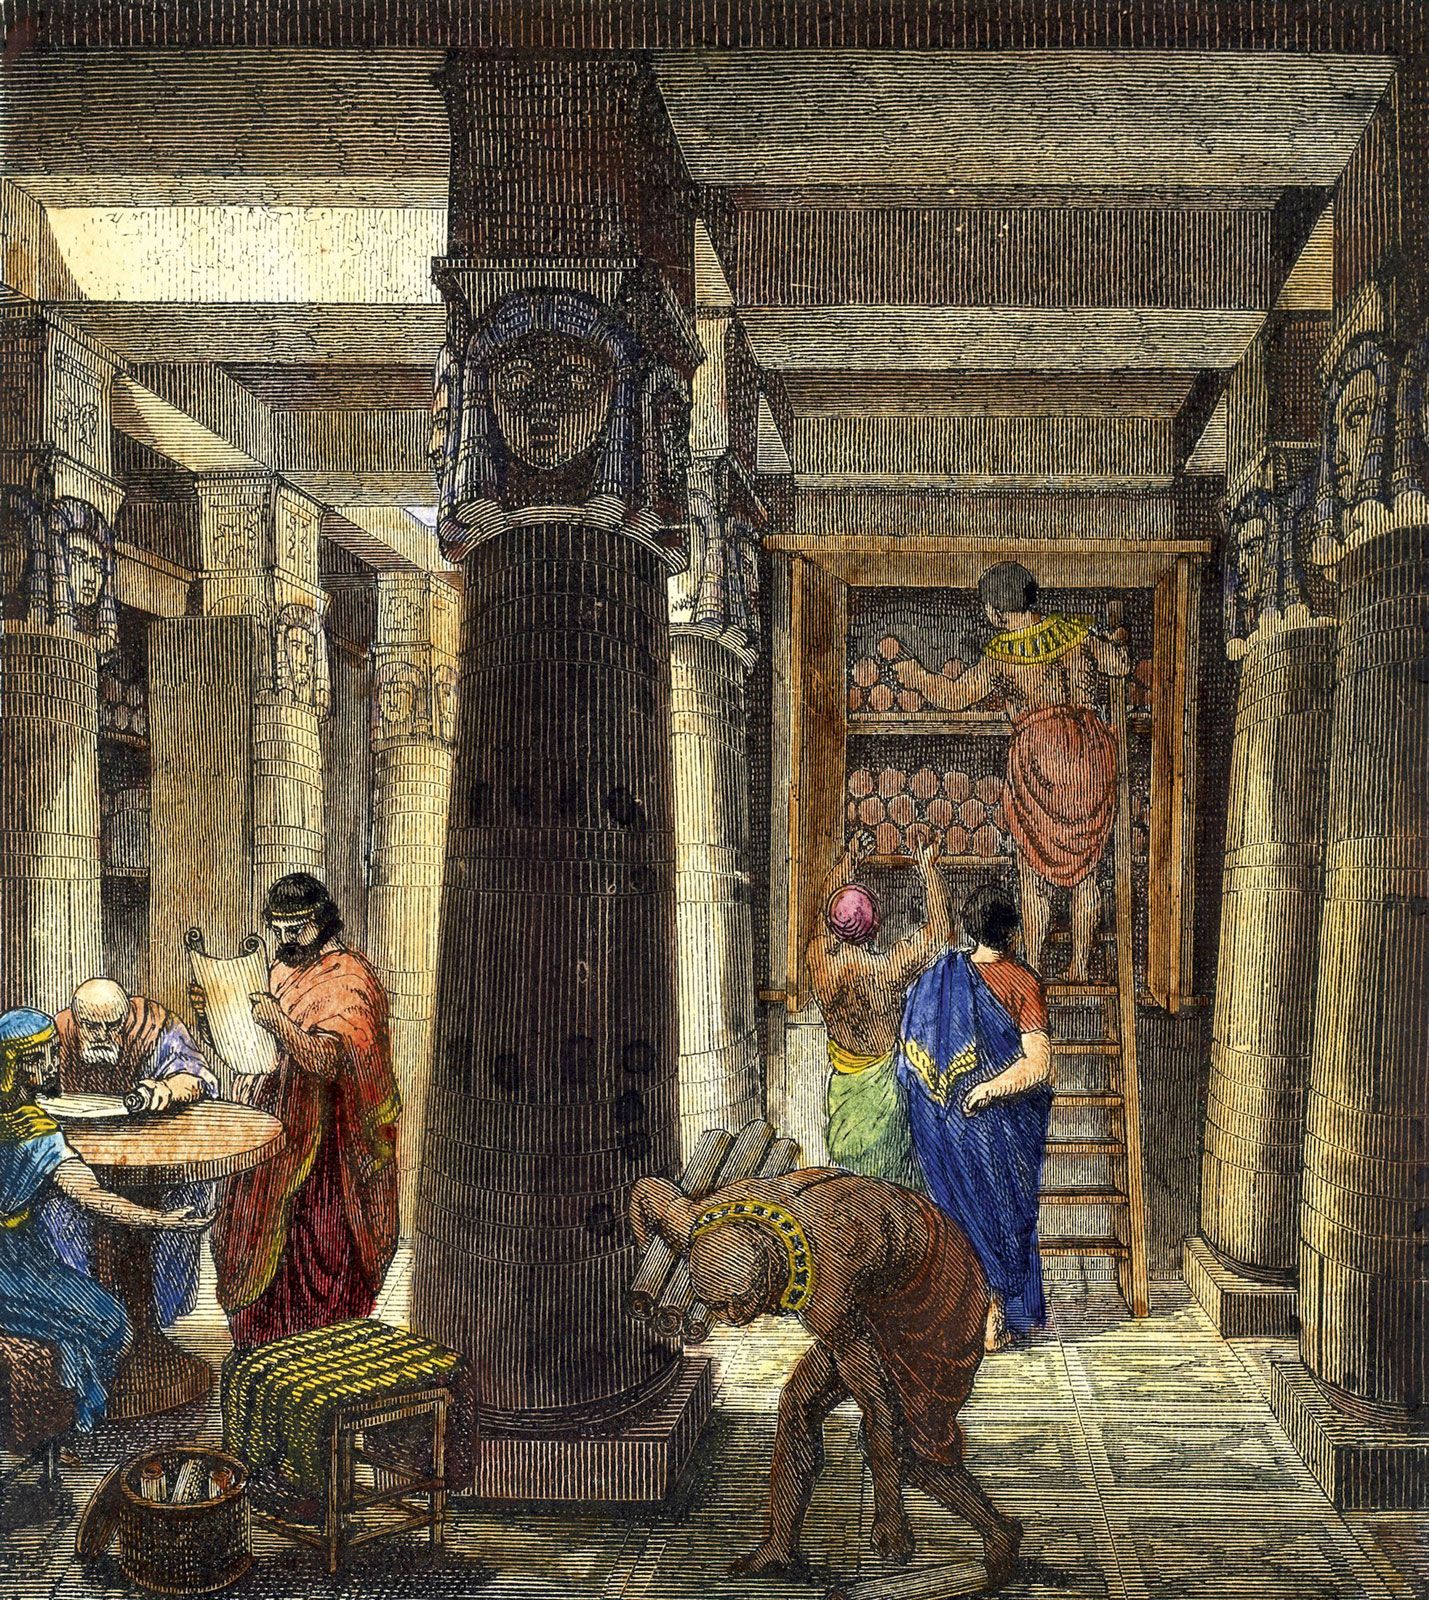 The Library of Alexandria by O. Von Corven